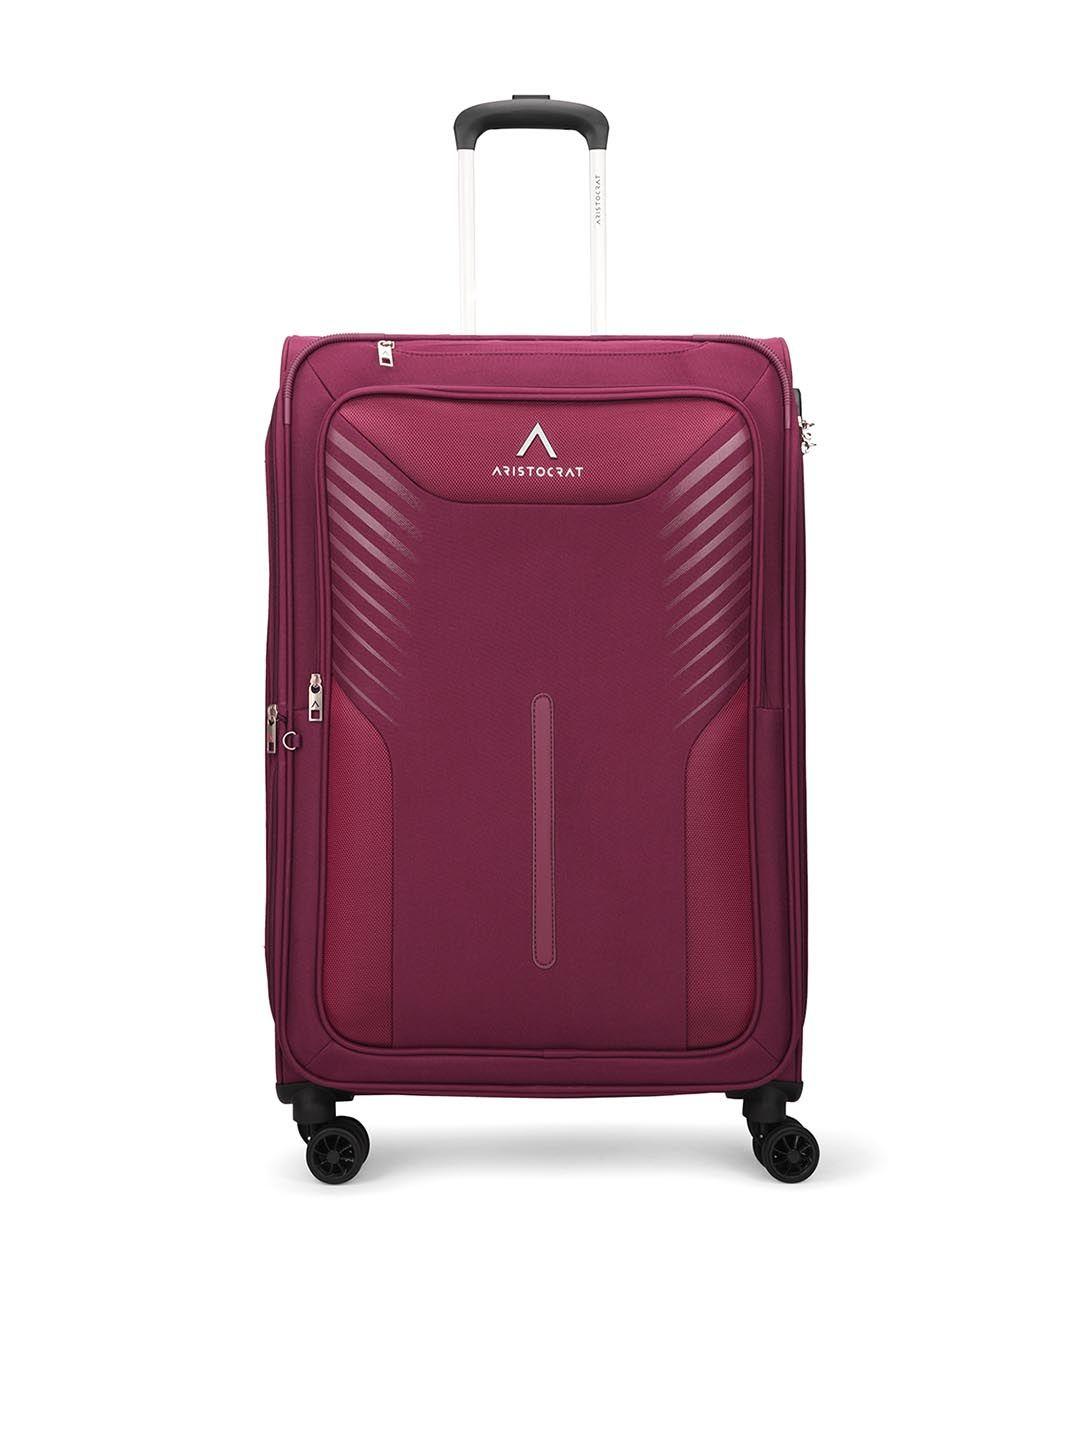 aristocrat soft-sided trolley suitcases